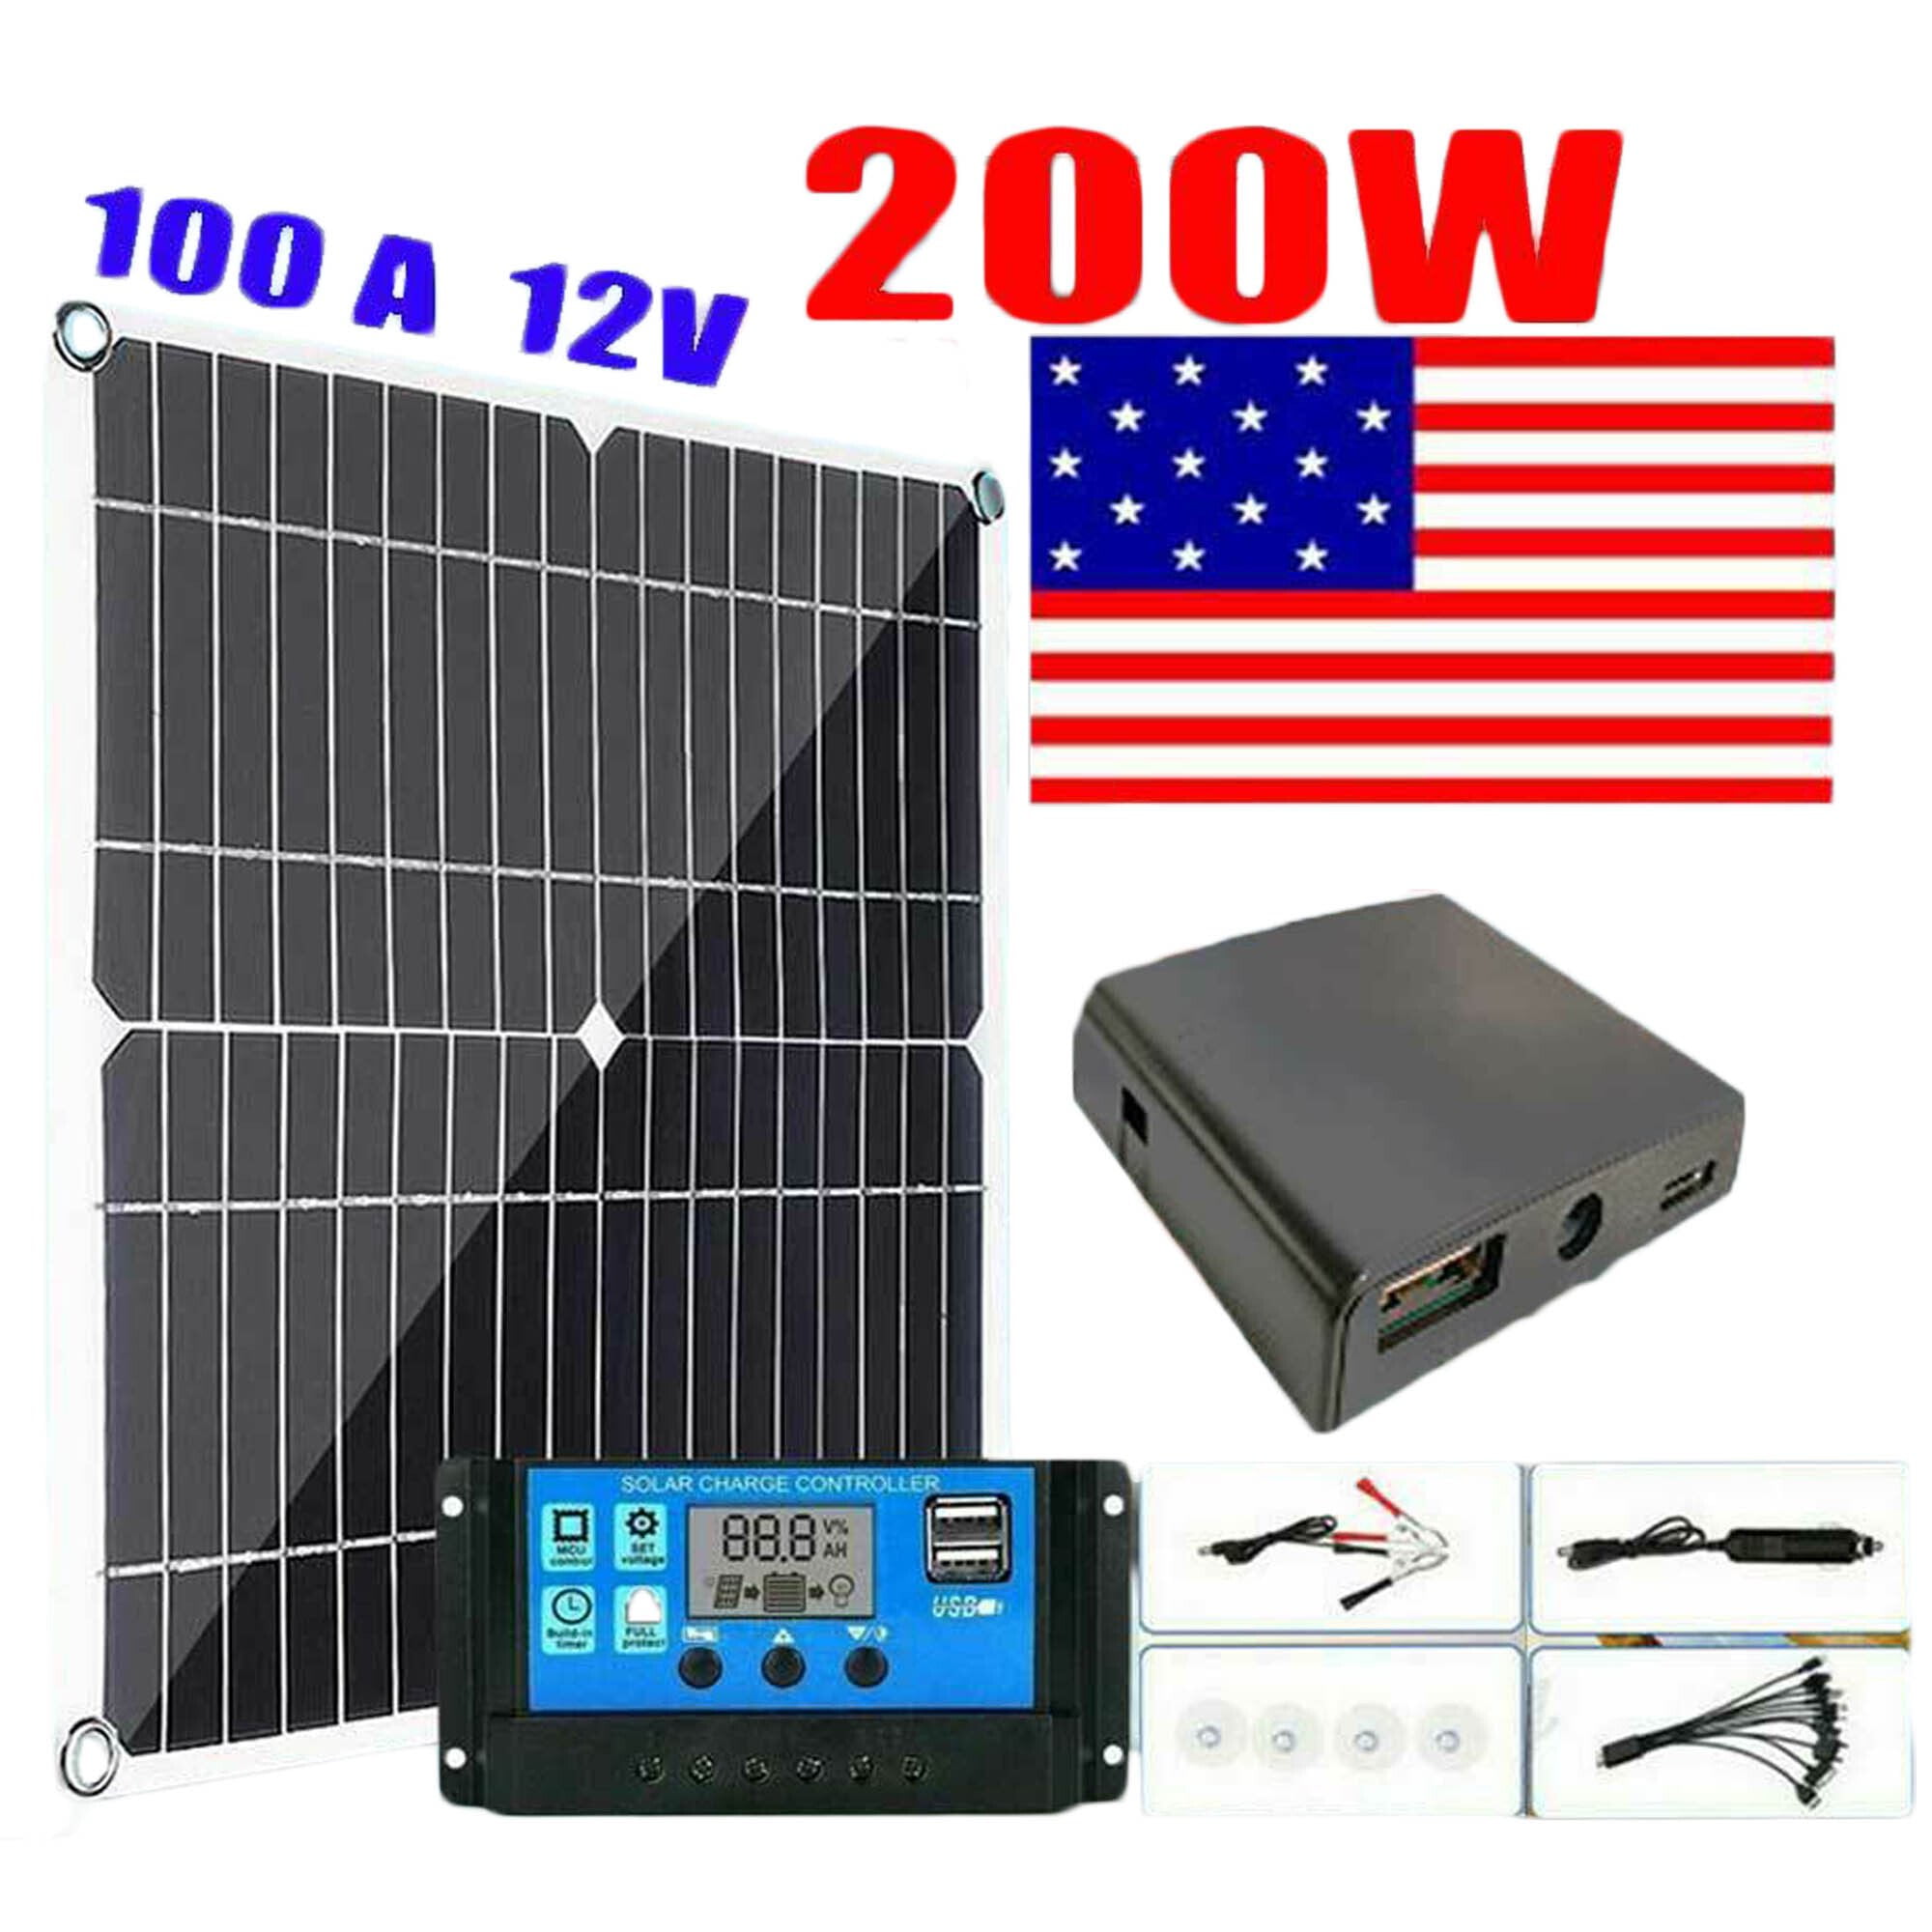 200W Solar Panel Kit 12V 10-50A Controller Caravan Boat Home RV Battery Charger 